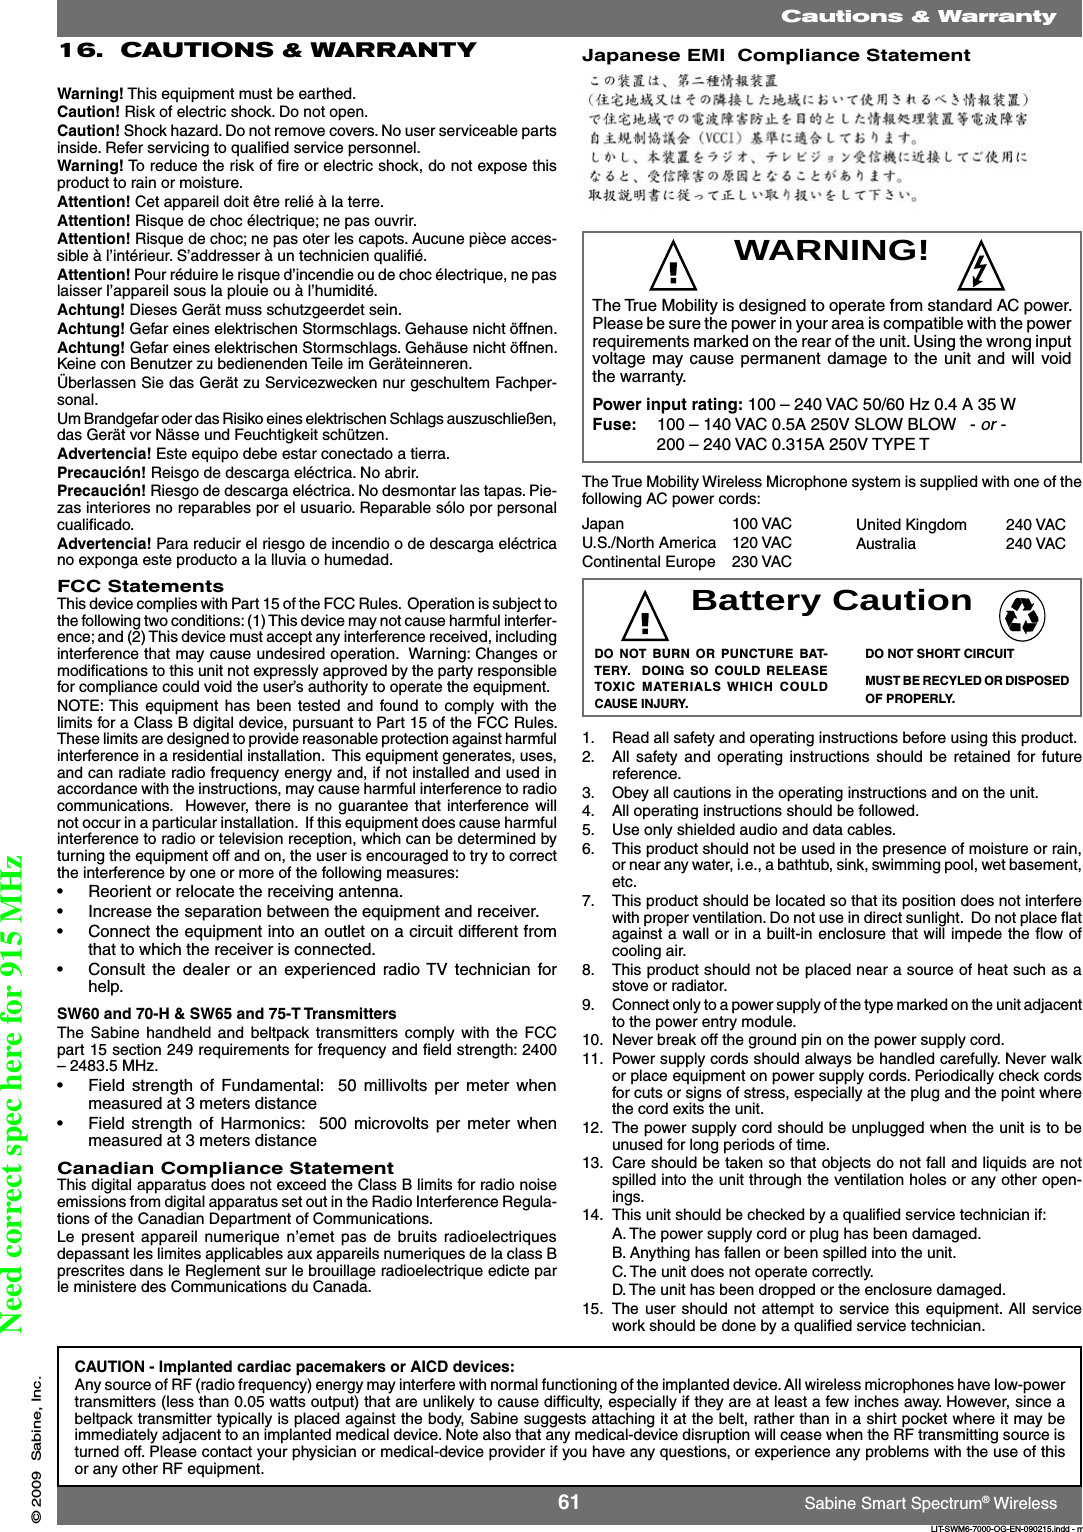 61 Sabine Smart Spectrum® WirelessLIT-SWM6-7000-OG-EN-090215.indd - rr© 2009  Sabine, Inc.Warning! This equipment must be earthed. Caution! Risk of electric shock. Do not open.Caution! Shock hazard. Do not remove covers. No user serviceable parts inside. Refer servicing to qualiﬁed service personnel. Warning! To reduce the risk of ﬁre or electric shock, do not expose this product to rain or moisture.Attention! Cet appareil doit être relié à la terre.Attention! Risque de choc électrique; ne pas ouvrir.Attention! Risque de choc; ne pas oter les capots. Aucune pièce acces-sible à l’intérieur. S’addresser à un technicien qualiﬁé.Attention! Pour réduire le risque d’incendie ou de choc électrique, ne pas laisser l’appareil sous la plouie ou à l’humidité.Achtung! Dieses Gerät muss schutzgeerdet sein.Achtung! Gefar eines elektrischen Stormschlags. Gehause nicht öffnen.Achtung! Gefar eines elektrischen Stormschlags. Gehäuse nicht öffnen. Keine con Benutzer zu bedienenden Teile im Geräteinneren.Überlassen Sie das Gerät zu Servicezwecken nur geschultem Fachper-sonal.Um Brandgefar oder das Risiko eines elektrischen Schlags auszuschließen, das Gerät vor Nässe und Feuchtigkeit schützen.Advertencia! Este equipo debe estar conectado a tierra.Precaución! Reisgo de descarga eléctrica. No abrir.Precaución! Riesgo de descarga eléctrica. No desmontar las tapas. Pie-zas interiores no reparables por el usuario. Reparable sólo por personal cualiﬁcado.Advertencia! Para reducir el riesgo de incendio o de descarga eléctrica no exponga este producto a la lluvia o humedad.FCC StatementsThis device complies with Part 15 of the FCC Rules.  Operation is subject to the following two conditions: (1) This device may not cause harmful interfer-ence; and (2) This device must accept any interference received, including interference that may cause undesired operation.  Warning: Changes or modiﬁcations to this unit not expressly approved by the party responsible for compliance could void the user’s authority to operate the equipment.NOTE: This  equipment  has  been tested  and  found to  comply  with  the limits for a Class B digital device, pursuant to Part 15 of the FCC Rules.  These limits are designed to provide reasonable protection against harmful interference in a residential installation.  This equipment generates, uses, and can radiate radio frequency energy and, if not installed and used in accordance with the instructions, may cause harmful interference to radio communications.   However, there is  no  guarantee  that  interference will not occur in a particular installation.  If this equipment does cause harmful interference to radio or television reception, which can be determined by turning the equipment off and on, the user is encouraged to try to correct the interference by one or more of the following measures:•  Reorient or relocate the receiving antenna.•  Increase the separation between the equipment and receiver.•  Connect the equipment into an outlet on a circuit different from that to which the receiver is connected.•  Consult the  dealer  or an  experienced radio TV  technician for help.SW60 and 70-H &amp; SW65 and 75-T TransmittersThe Sabine  handheld and  beltpack  transmitters  comply with  the  FCC part 15 section 249 requirements for frequency and ﬁeld strength: 2400 – 2483.5 MHz. •  Field strength  of  Fundamental:   50  millivolts per  meter  when measured at 3 meters distance•  Field strength  of  Harmonics:   500  microvolts  per  meter  when measured at 3 meters distanceCanadian Compliance StatementThis digital apparatus does not exceed the Class B limits for radio noise emissions from digital apparatus set out in the Radio Interference Regula-tions of the Canadian Department of Communications.Le present  appareil numerique  n’emet pas  de  bruits  radioelectriques depassant les limites applicables aux appareils numeriques de la class B prescrites dans le Reglement sur le brouillage radioelectrique edicte par le ministere des Communications du Canada.WARNING!Battery CautionDO  NOT  BURN  OR  PUNCTURE  BAT-TERY.    DOING  SO  COULD  RELEASE TOXIC  MATERIALS WHICH  COULD CAUSE INJURY.DO NOT SHORT CIRCUITMUST BE RECYLED OR DISPOSED OF PROPERLY.1.  Read all safety and operating instructions before using this product. 2.  All safety and  operating  instructions  should  be retained  for  future reference.3.  Obey all cautions in the operating instructions and on the unit.4.  All operating instructions should be followed.5.  Use only shielded audio and data cables.6.  This product should not be used in the presence of moisture or rain, or near any water, i.e., a bathtub, sink, swimming pool, wet basement, etc.7.  This product should be located so that its position does not interfere with proper ventilation. Do not use in direct sunlight.  Do not place ﬂat against a wall or in a built-in enclosure that will impede the ﬂow of cooling air.8.  This product should not be placed near a source of heat such as a stove or radiator.9.  Connect only to a power supply of the type marked on the unit adjacent to the power entry module.10.  Never break off the ground pin on the power supply cord.11.  Power supply cords should always be handled carefully. Never walk or place equipment on power supply cords. Periodically check cords for cuts or signs of stress, especially at the plug and the point where the cord exits the unit.12.  The power supply cord should be unplugged when the unit is to be unused for long periods of time.13.  Care should be taken so that objects do not fall and liquids are not spilled into the unit through the ventilation holes or any other open-ings.14.  This unit should be checked by a qualiﬁed service technician if:A. The power supply cord or plug has been damaged.B. Anything has fallen or been spilled into the unit.C. The unit does not operate correctly.D. The unit has been dropped or the enclosure damaged.15.  The user  should  not  attempt  to  service this equipment. All service work should be done by a qualiﬁed service technician.16.  CAUTIONS &amp; WARRANTYCautions &amp; WarrantyCAUTION - Implanted cardiac pacemakers or AICD devices:Any source of RF (radio frequency) energy may interfere with normal functioning of the implanted device. All wireless microphones have Iow-power transmitters (less than 0.05 watts output) that are unlikely to cause difﬁculty, especially if they are at least a few inches away. However, since a beltpack transmitter typically is placed against the body, Sabine suggests attaching it at the belt, rather than in a shirt pocket where it may be immediately adjacent to an implanted medical device. Note also that any medical-device disruption will cease when the RF transmitting source is turned off. Please contact your physician or medical-device provider if you have any questions, or experience any problems with the use of this or any other RF equipment.Japan    100 VACU.S./North America  120 VACContinental Europe  230 VACUnited Kingdom  240 VACAustralia    240 VACJapanese EMI  Compliance StatementThe True Mobility is designed to operate from standard AC power. Please be sure the power in your area is compatible with the power requirements marked on the rear of the unit. Using the wrong input voltage may cause permanent damage to the unit and will void the warranty.Power input rating: 100 – 240 VAC 50/60 Hz 0.4 A 35 WFuse:   100 – 140 VAC 0.5A 250V SLOW BLOW   - or -  200 – 240 VAC 0.315A 250V TYPE TThe True Mobility Wireless Microphone system is supplied with one of the following AC power cords:Need correct spec here for 915 MHz